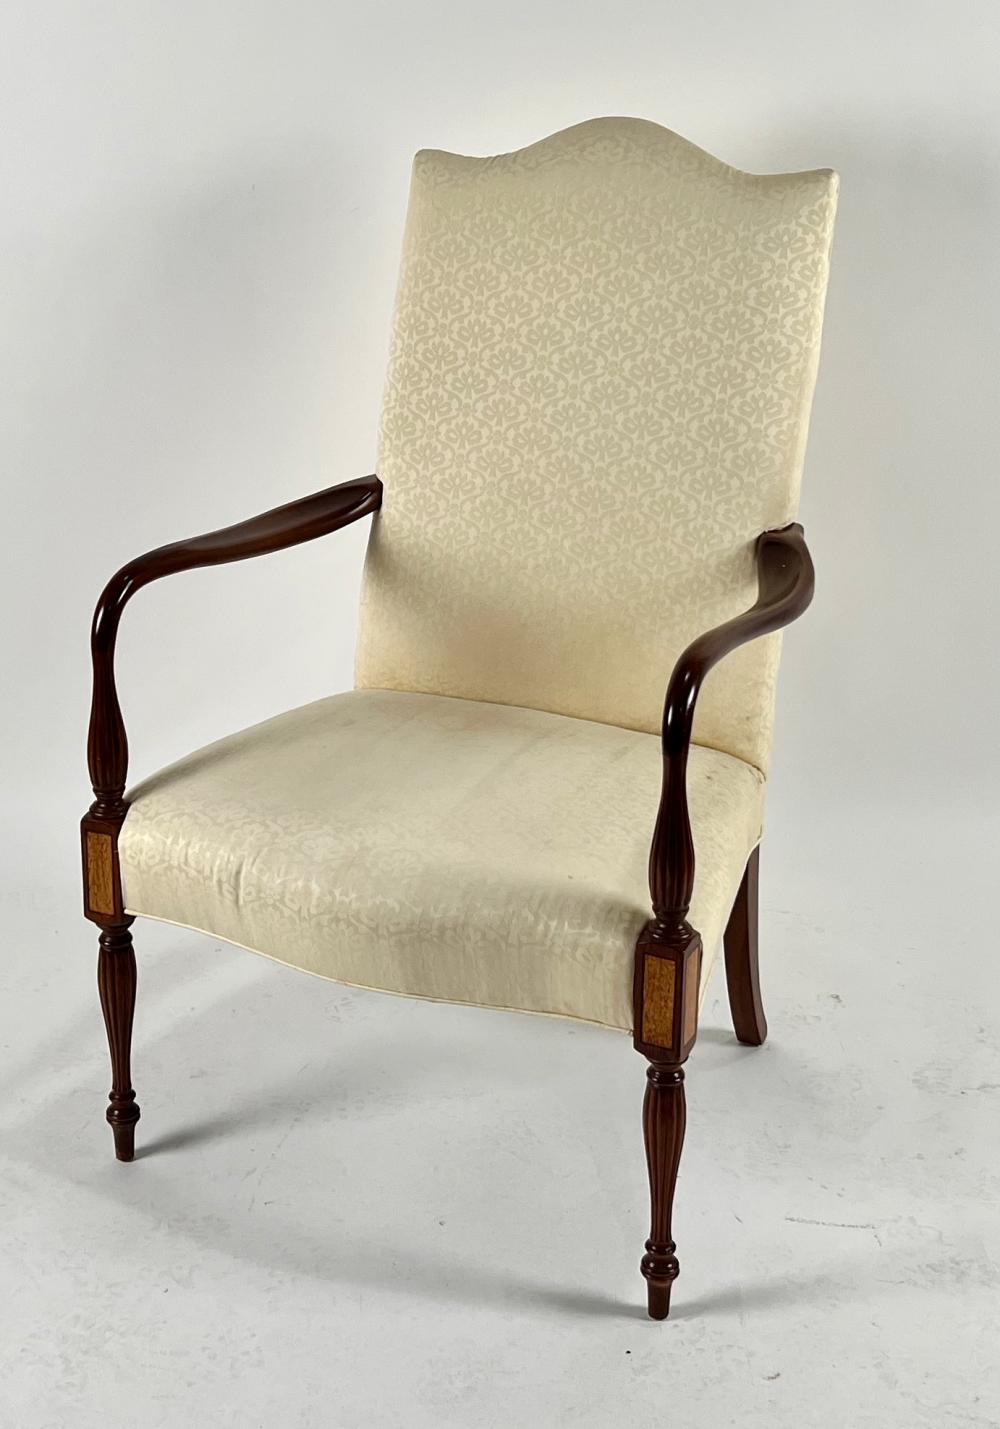 FEDERAL STYLE ARMCHAIR 20TH CENTURY 2f2403